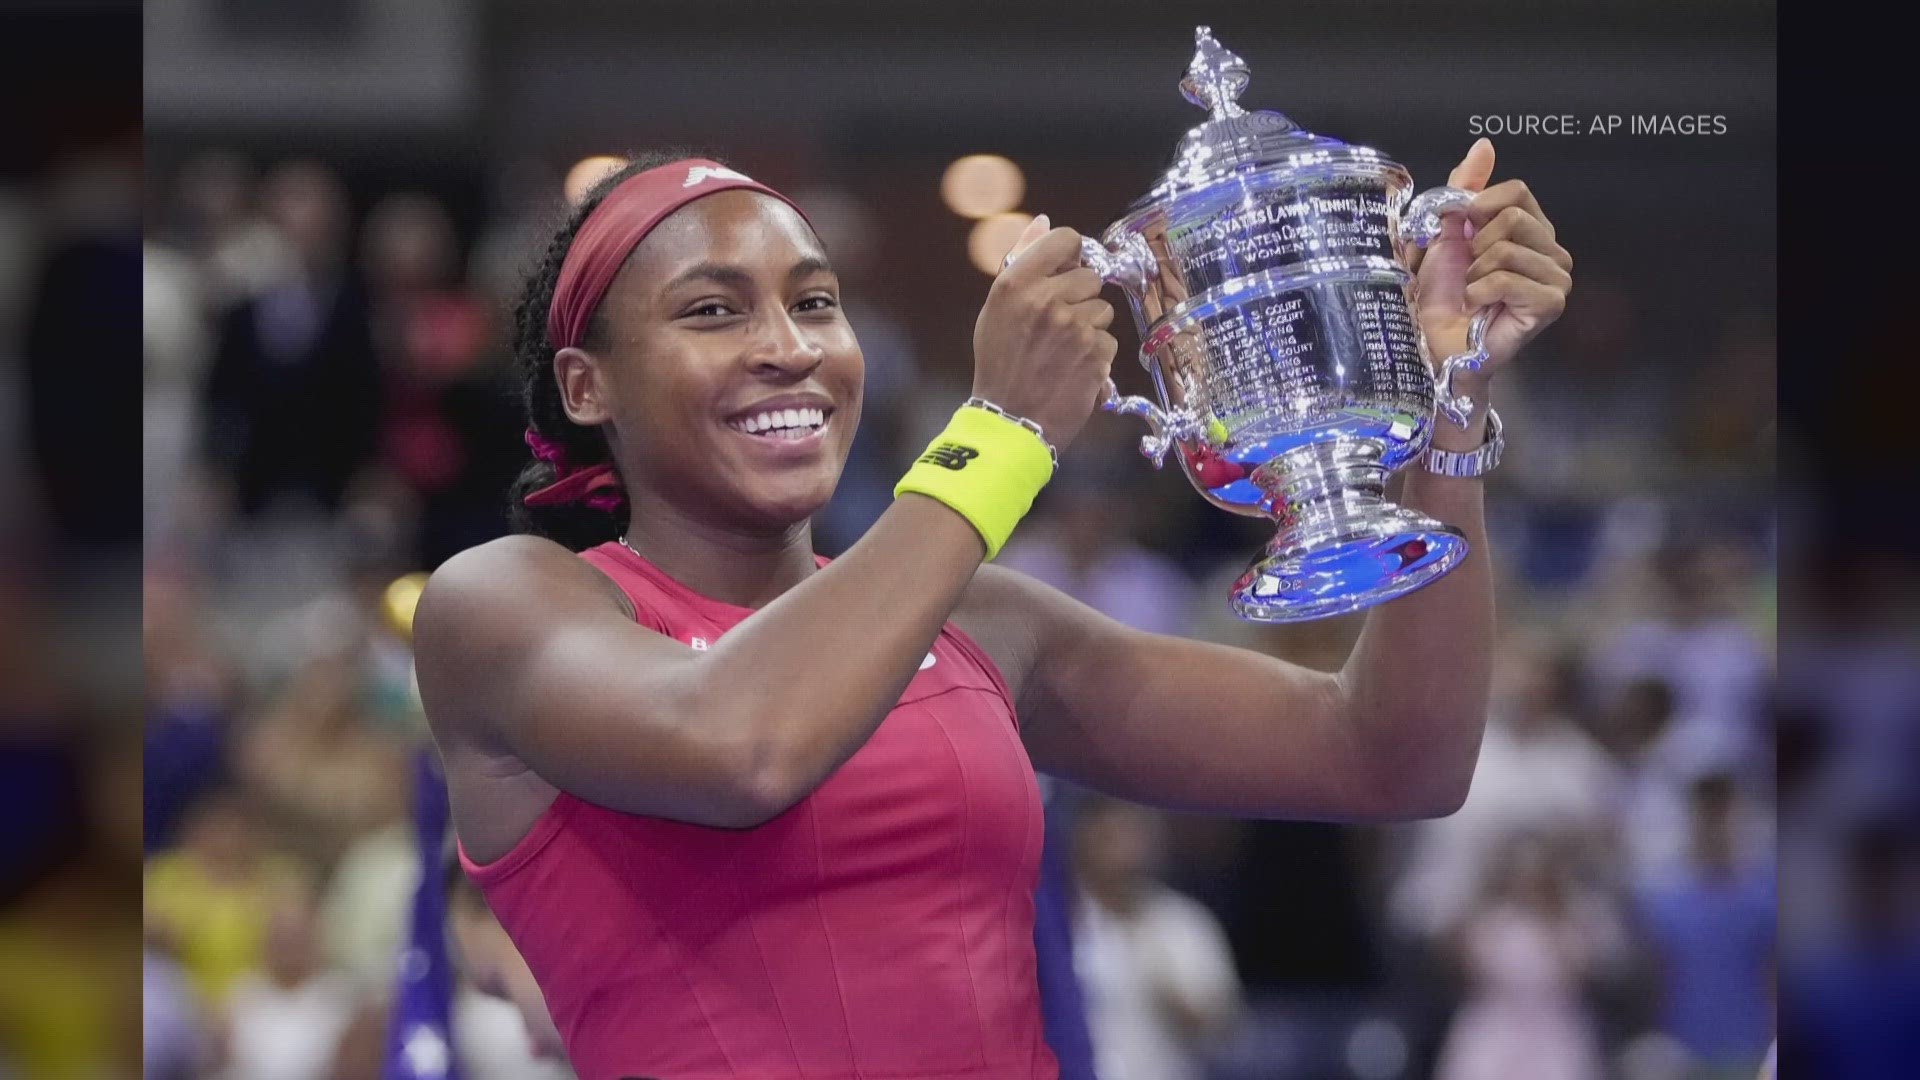 19-year-old Coco Gauff is the youngest women's tennis player to win the U.S. Open since Serena Williams did it in 1999 at 17 years old.